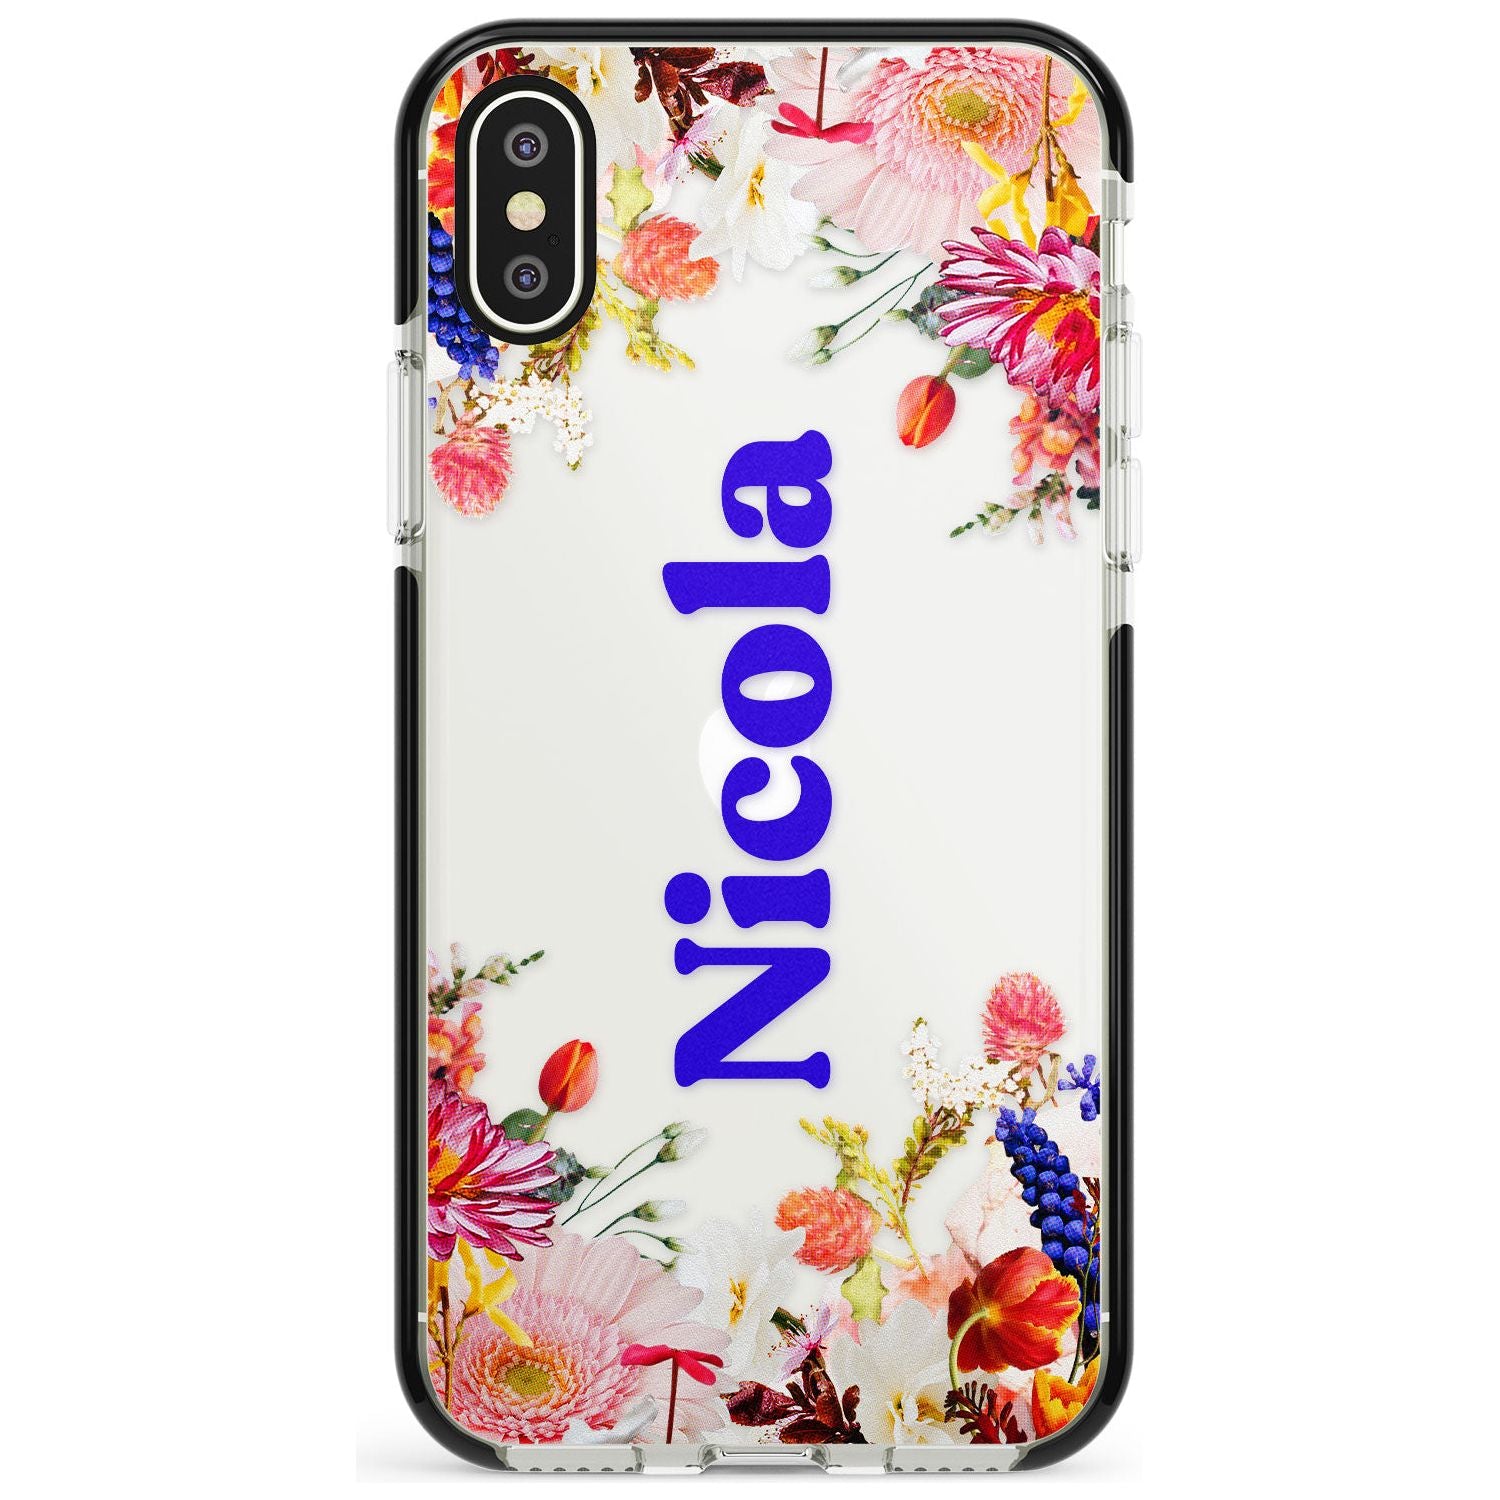 Custom Text with Floral Borders Pink Fade Impact Phone Case for iPhone X XS Max XR